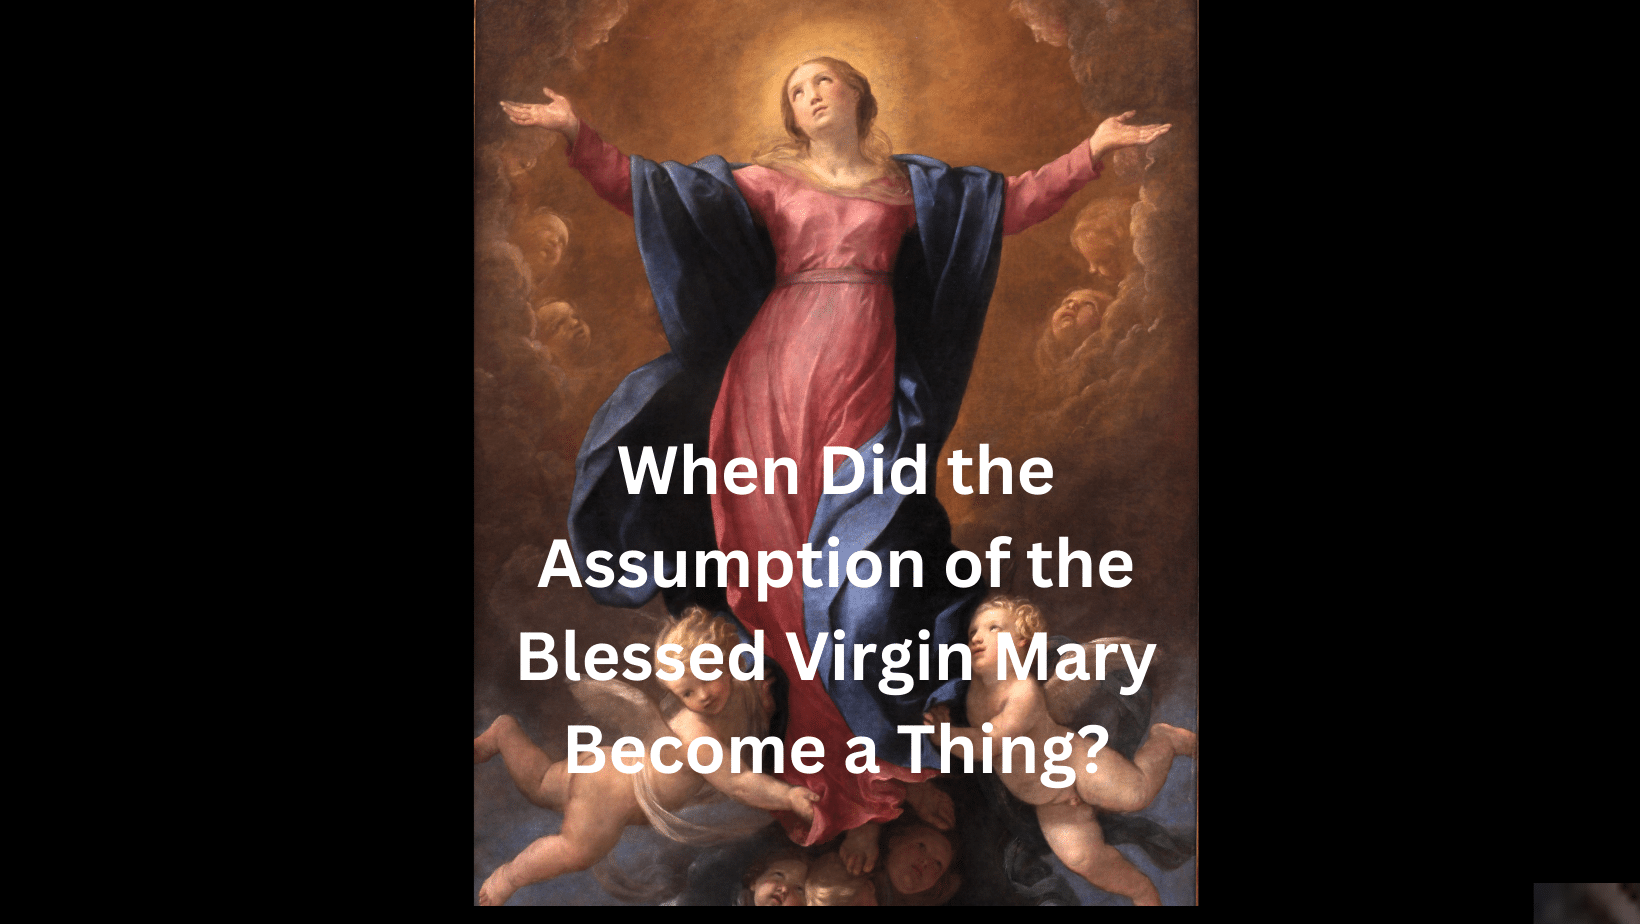 the assumption of the blessed virgin mary